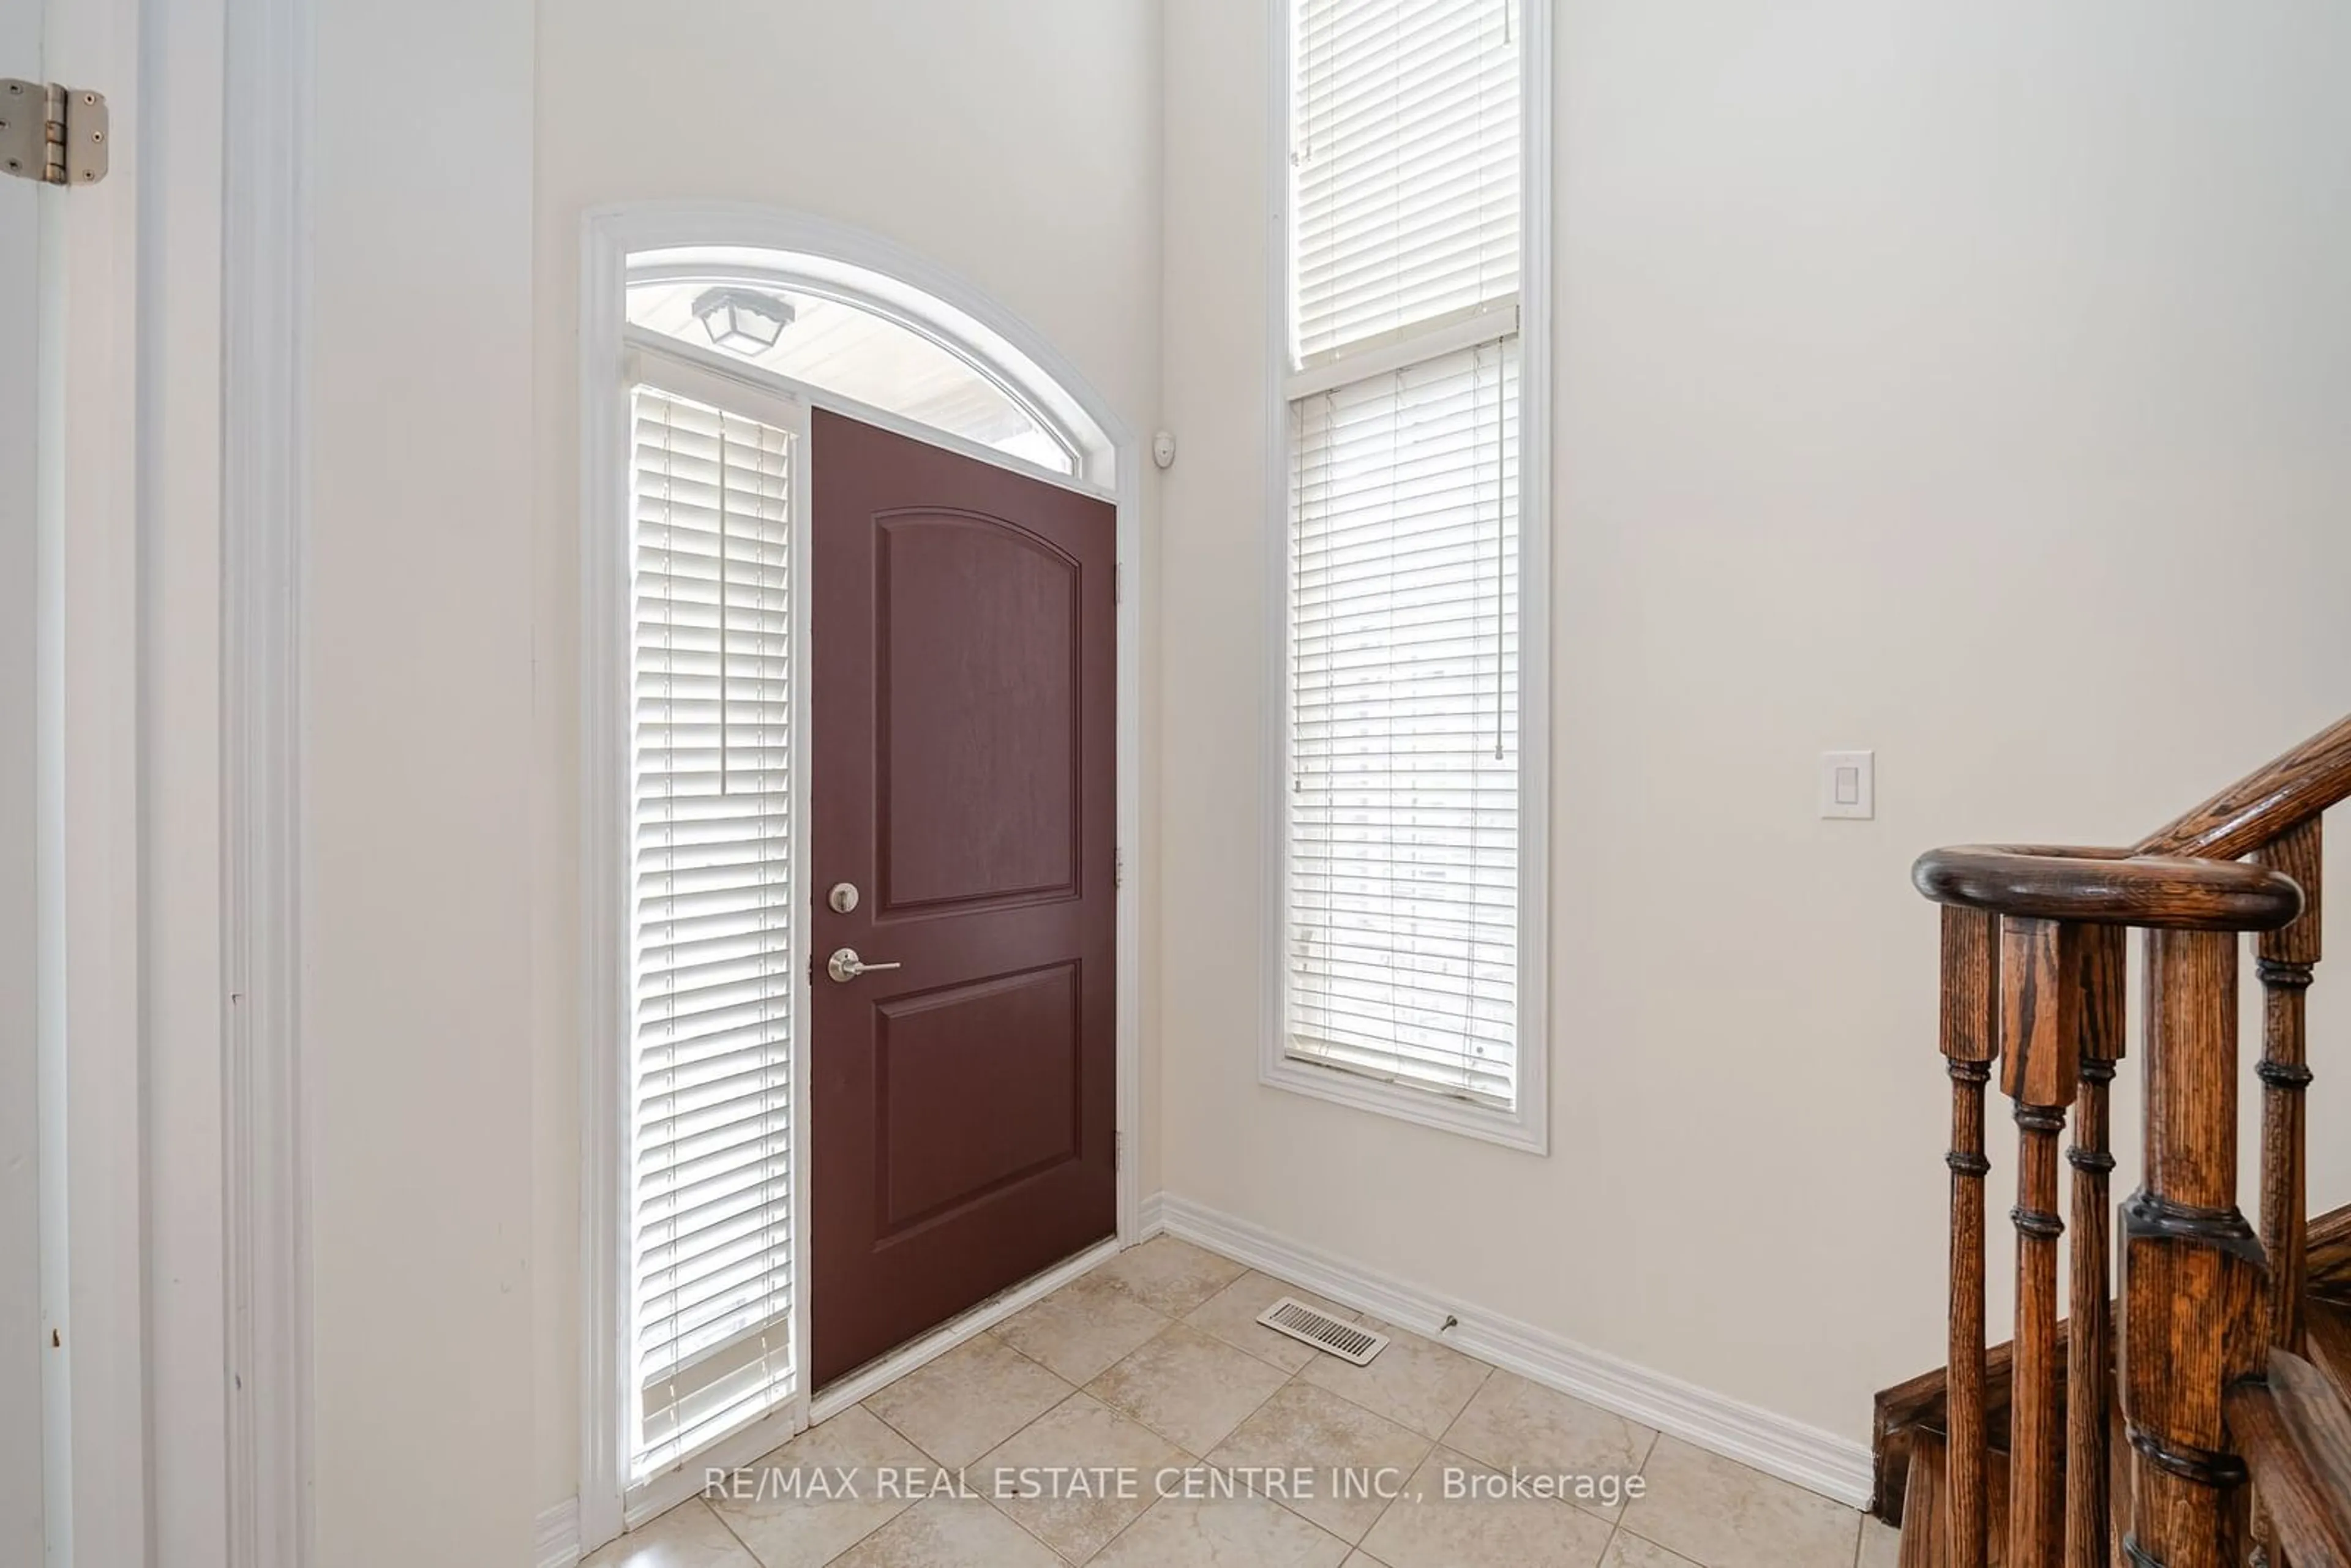 Indoor entryway for 5358 Mallory Rd, Mississauga Ontario L5M 0J3